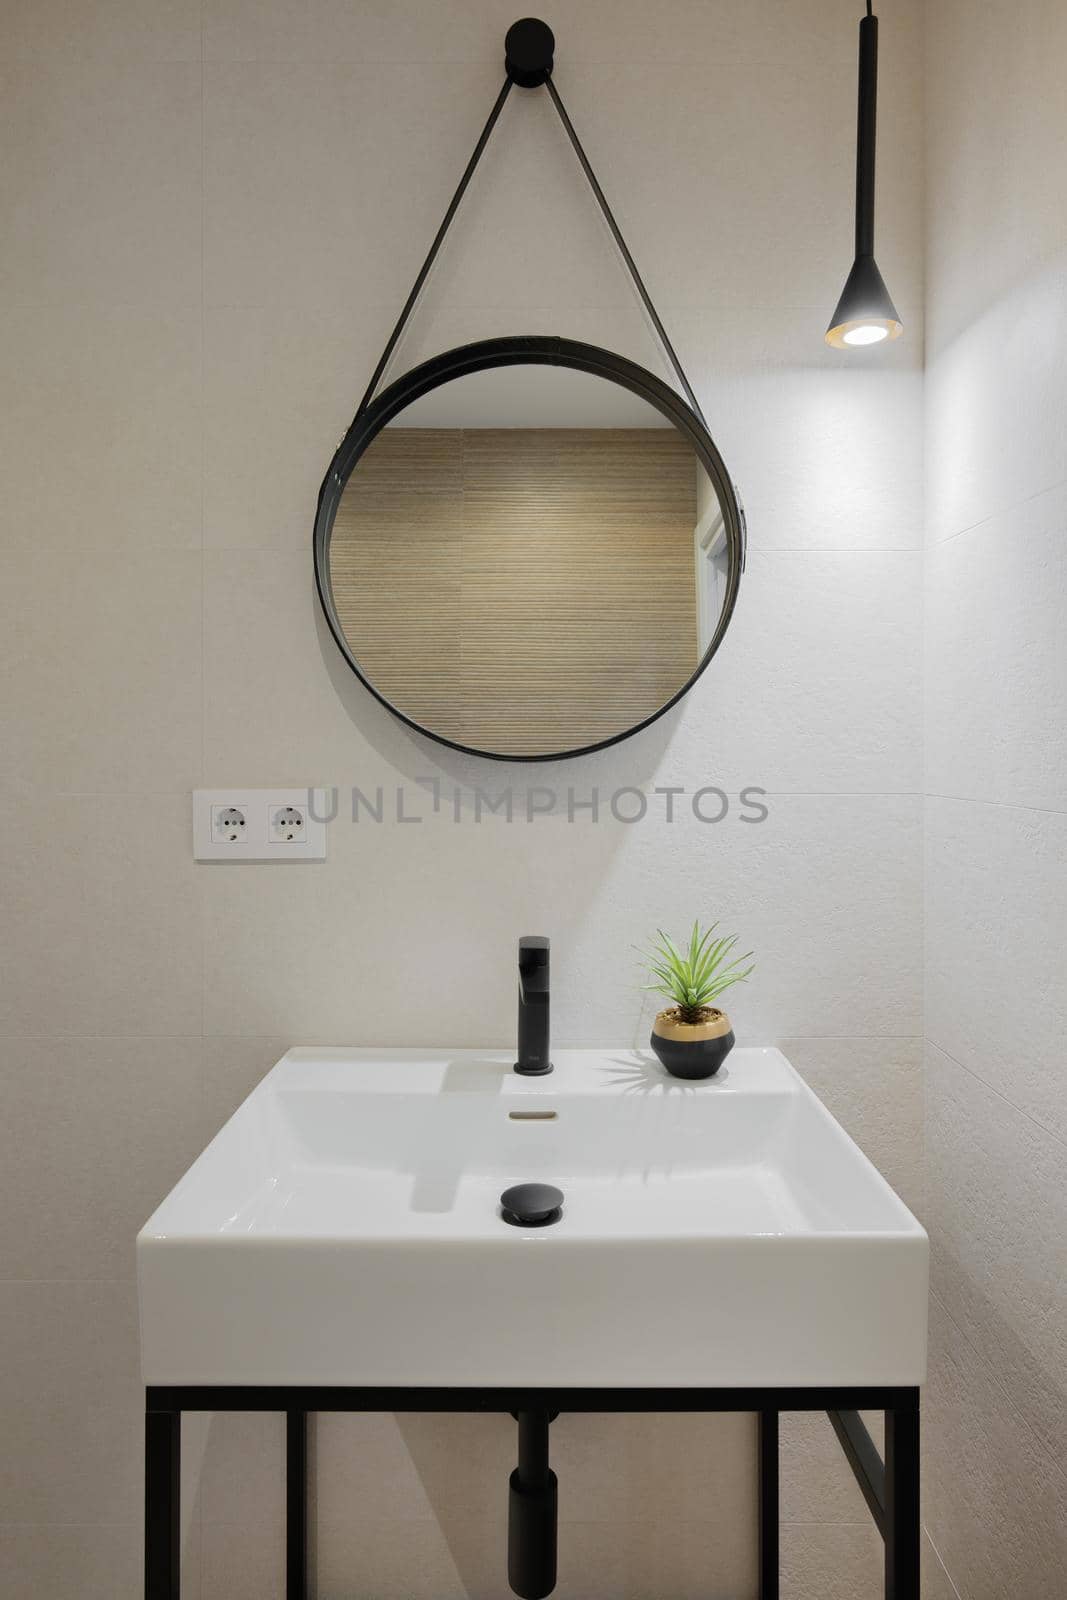 Interior of modern style bathroom in refurbished apartment. White sink with black faucet and round mirror frame, lighted by one lamp